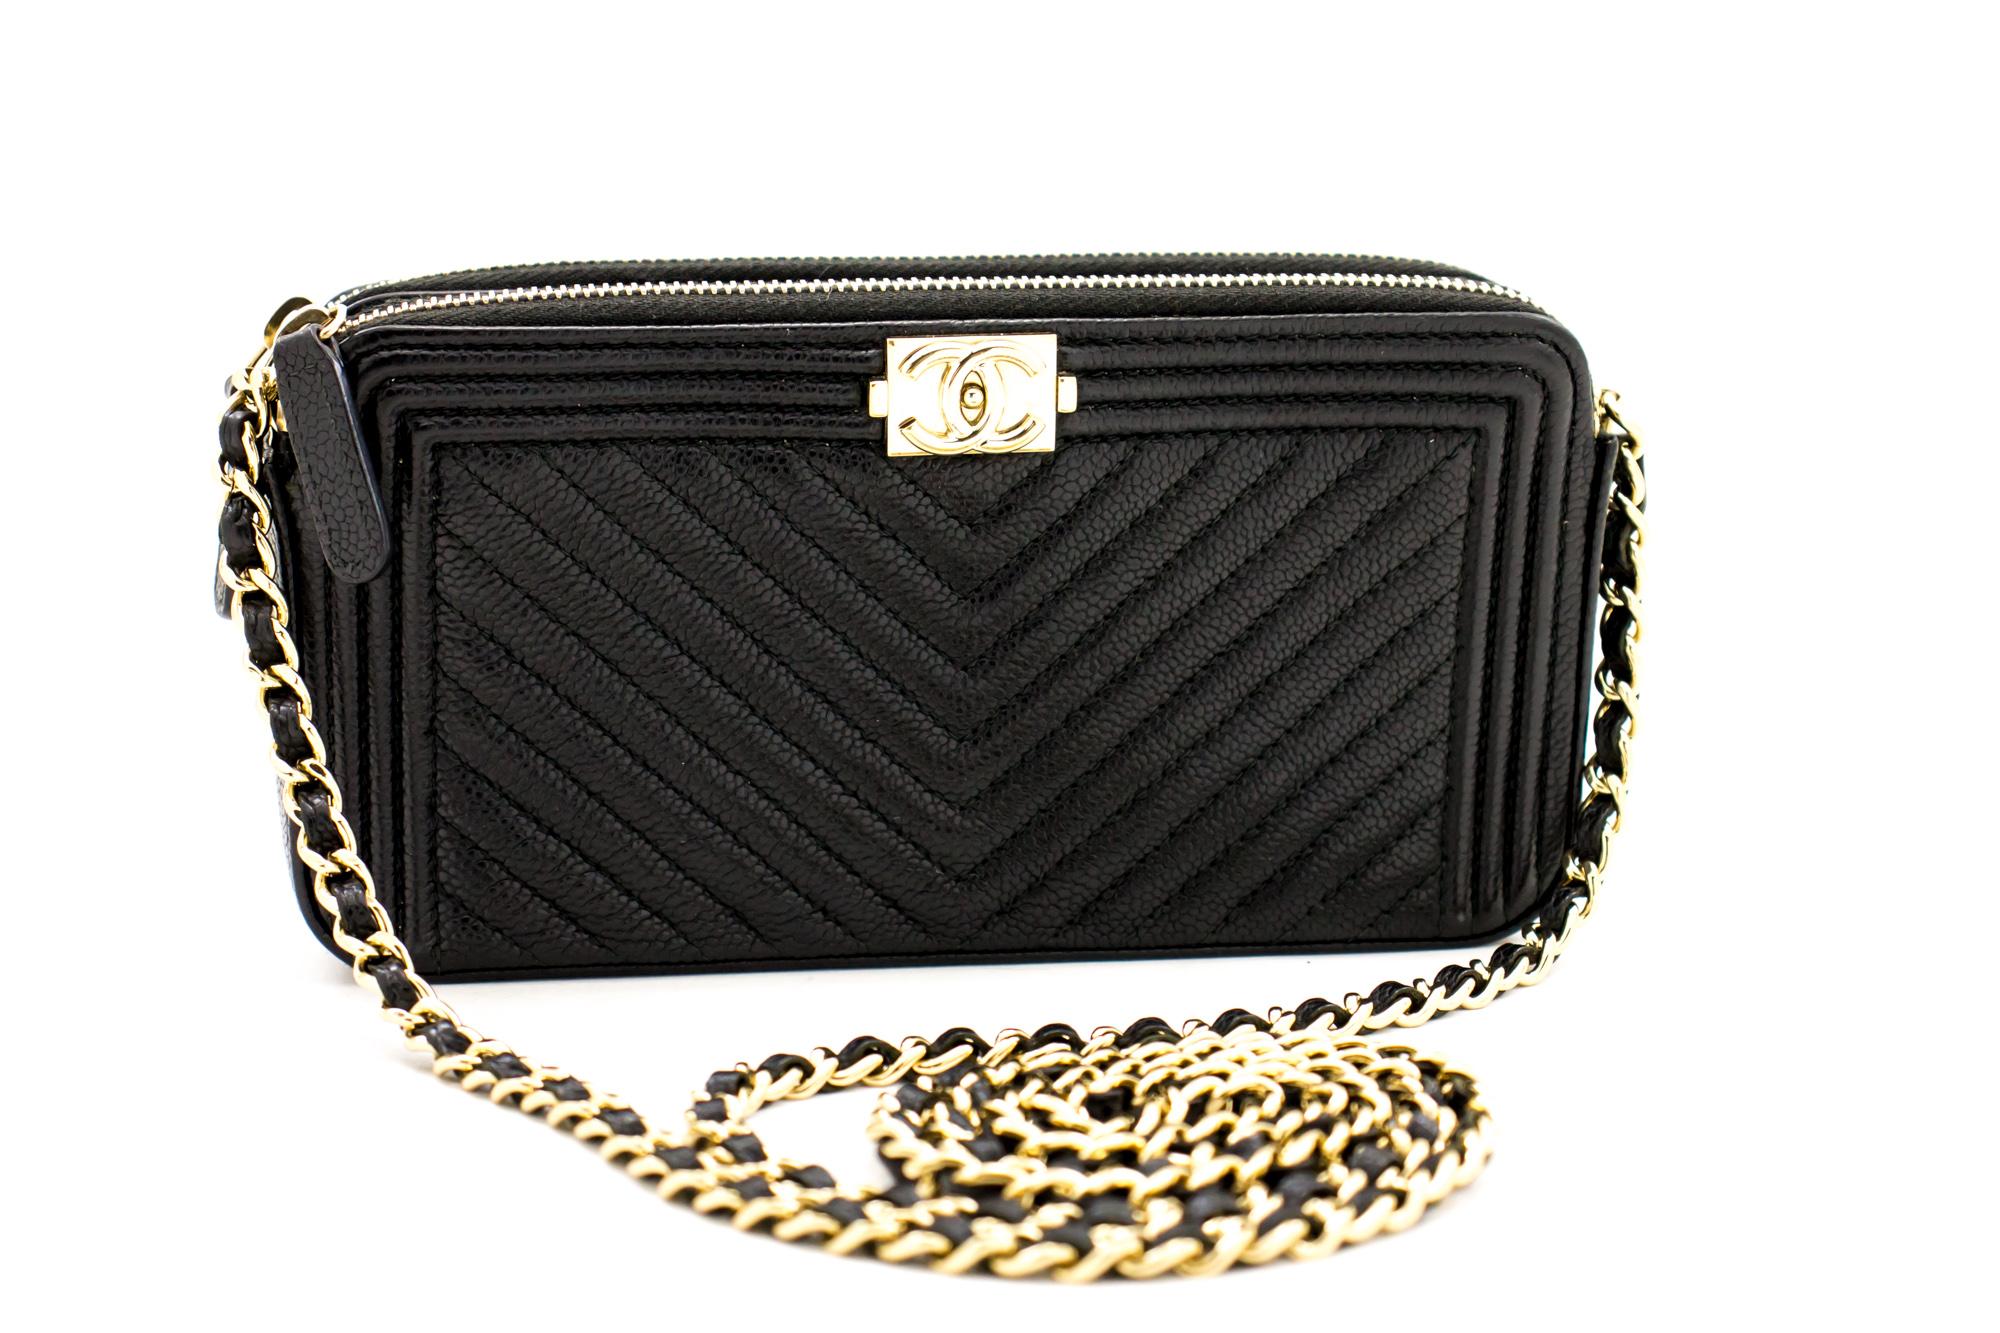 An authentic CHANEL Boy Black Caviar Wallet On Chain WOC Zipper Shoulder Bag. The color is Black. The outside material is Leather. The pattern is Solid. This item is Contemporary. The year of manufacture would be 2018.
Conditions & Ratings
Outside